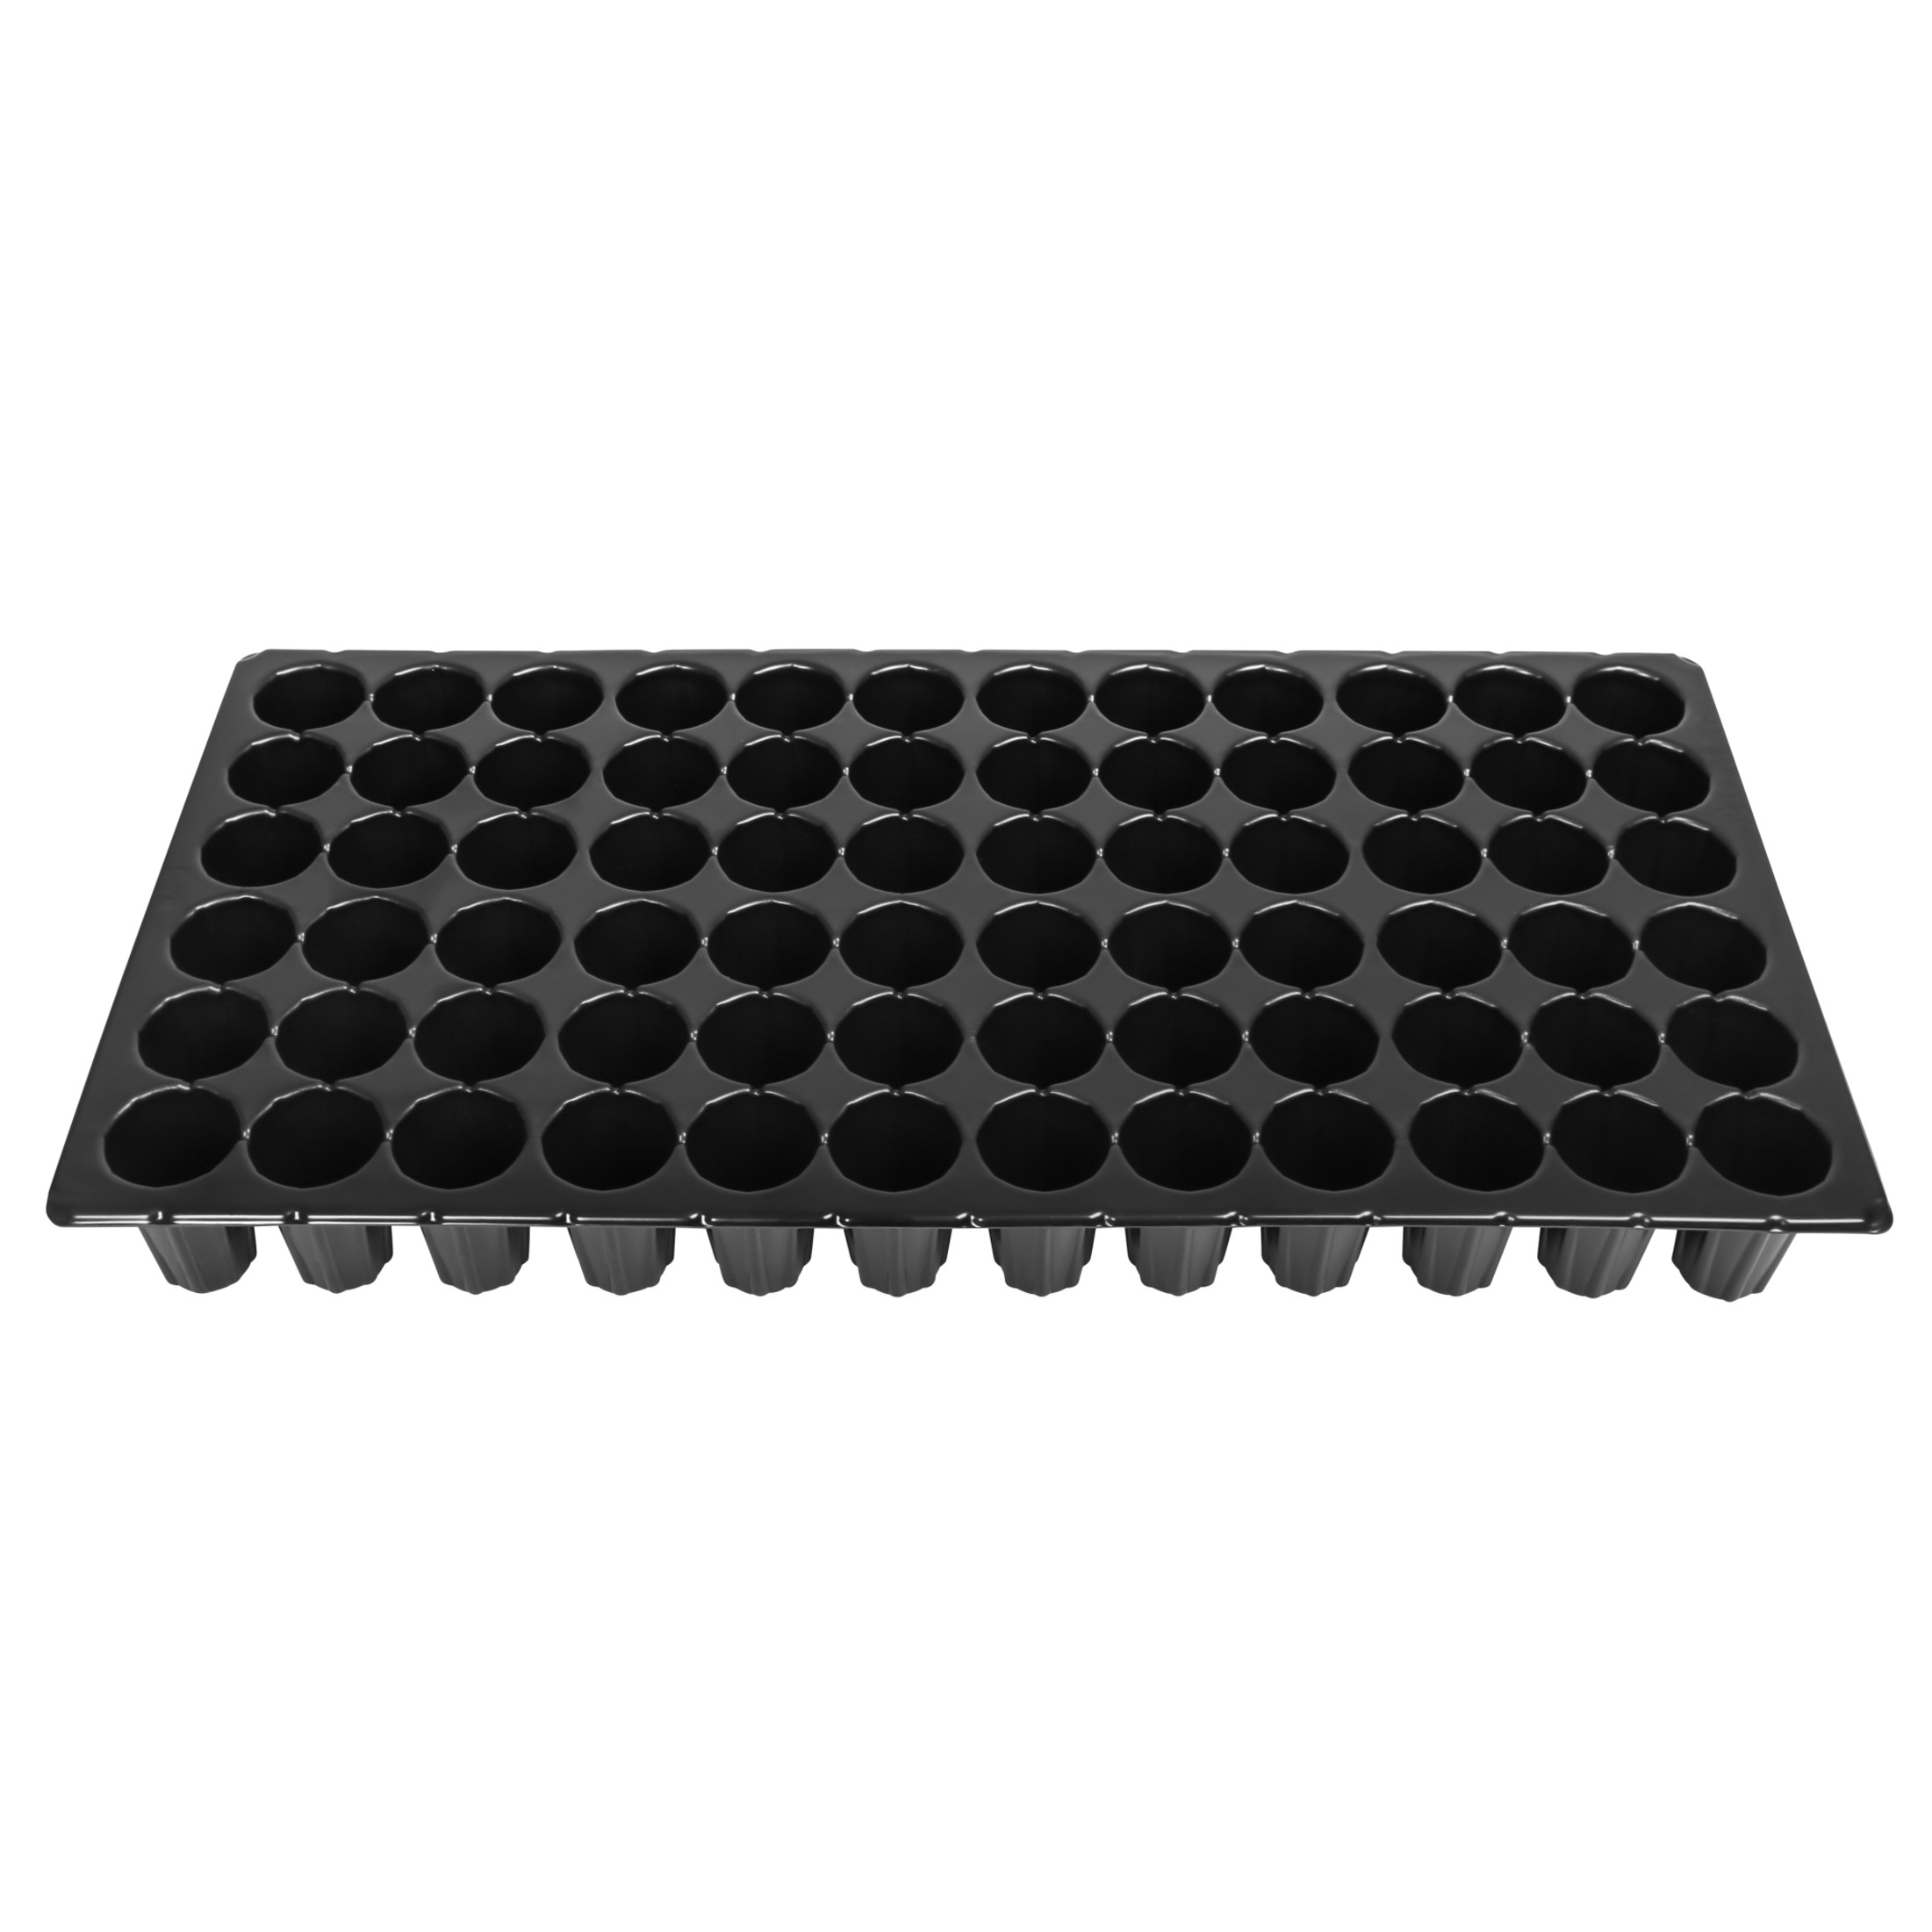 Sunpack 21"x11" 72-Cell Extra Strength Round Insert, for Greenhouses, Gardening, and Seedlings, Black, Fits 10"x20" Trays